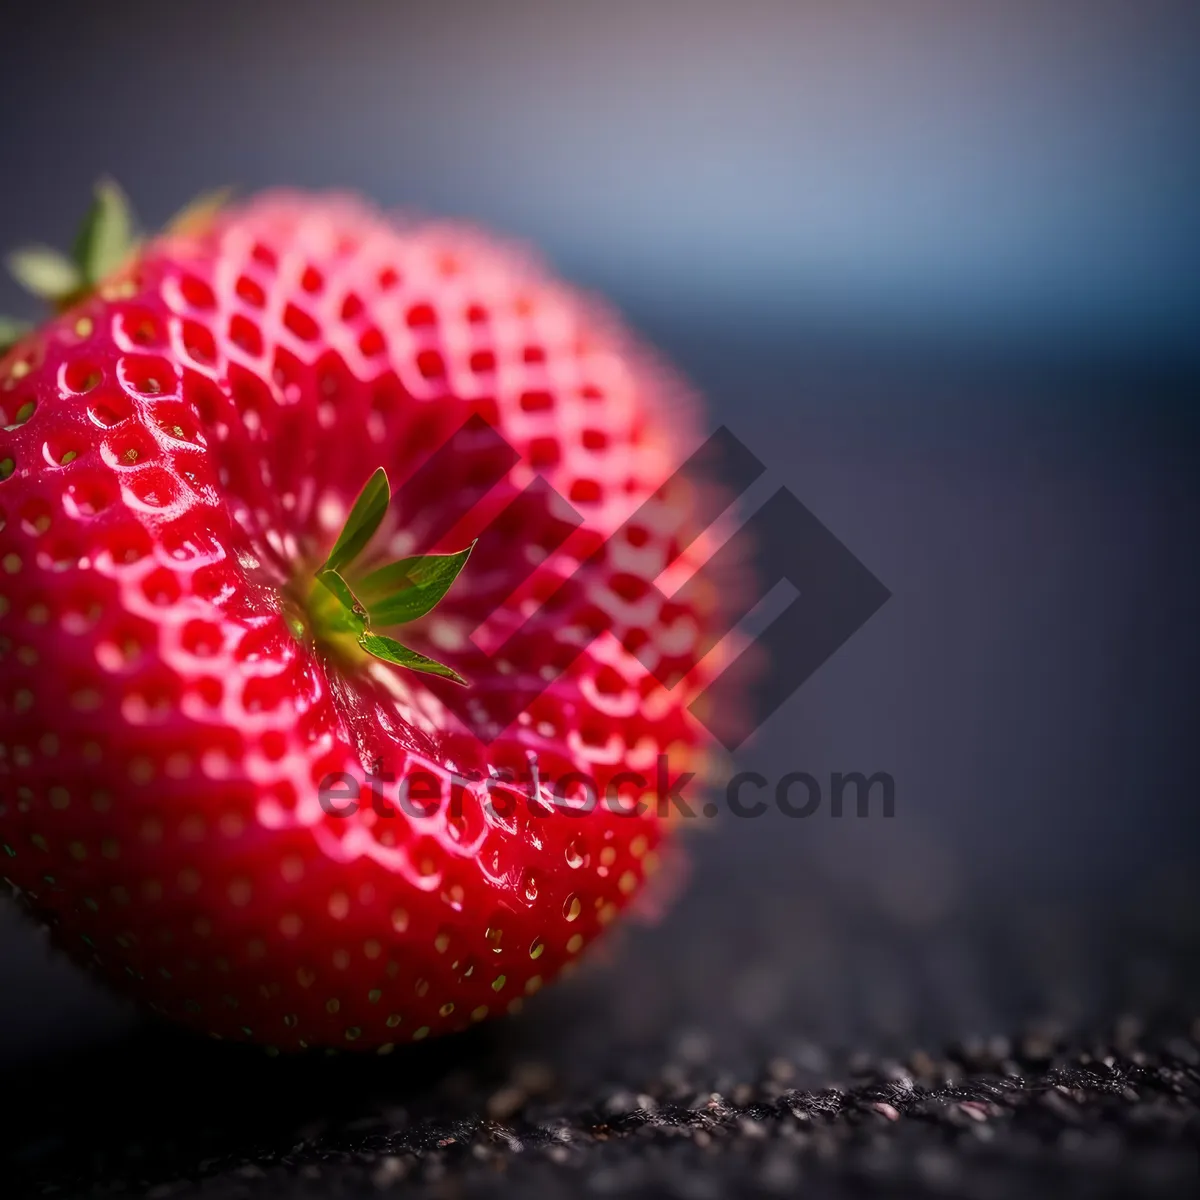 Picture of Juicy Strawberry - Refreshing and Nutritious Summer Snack